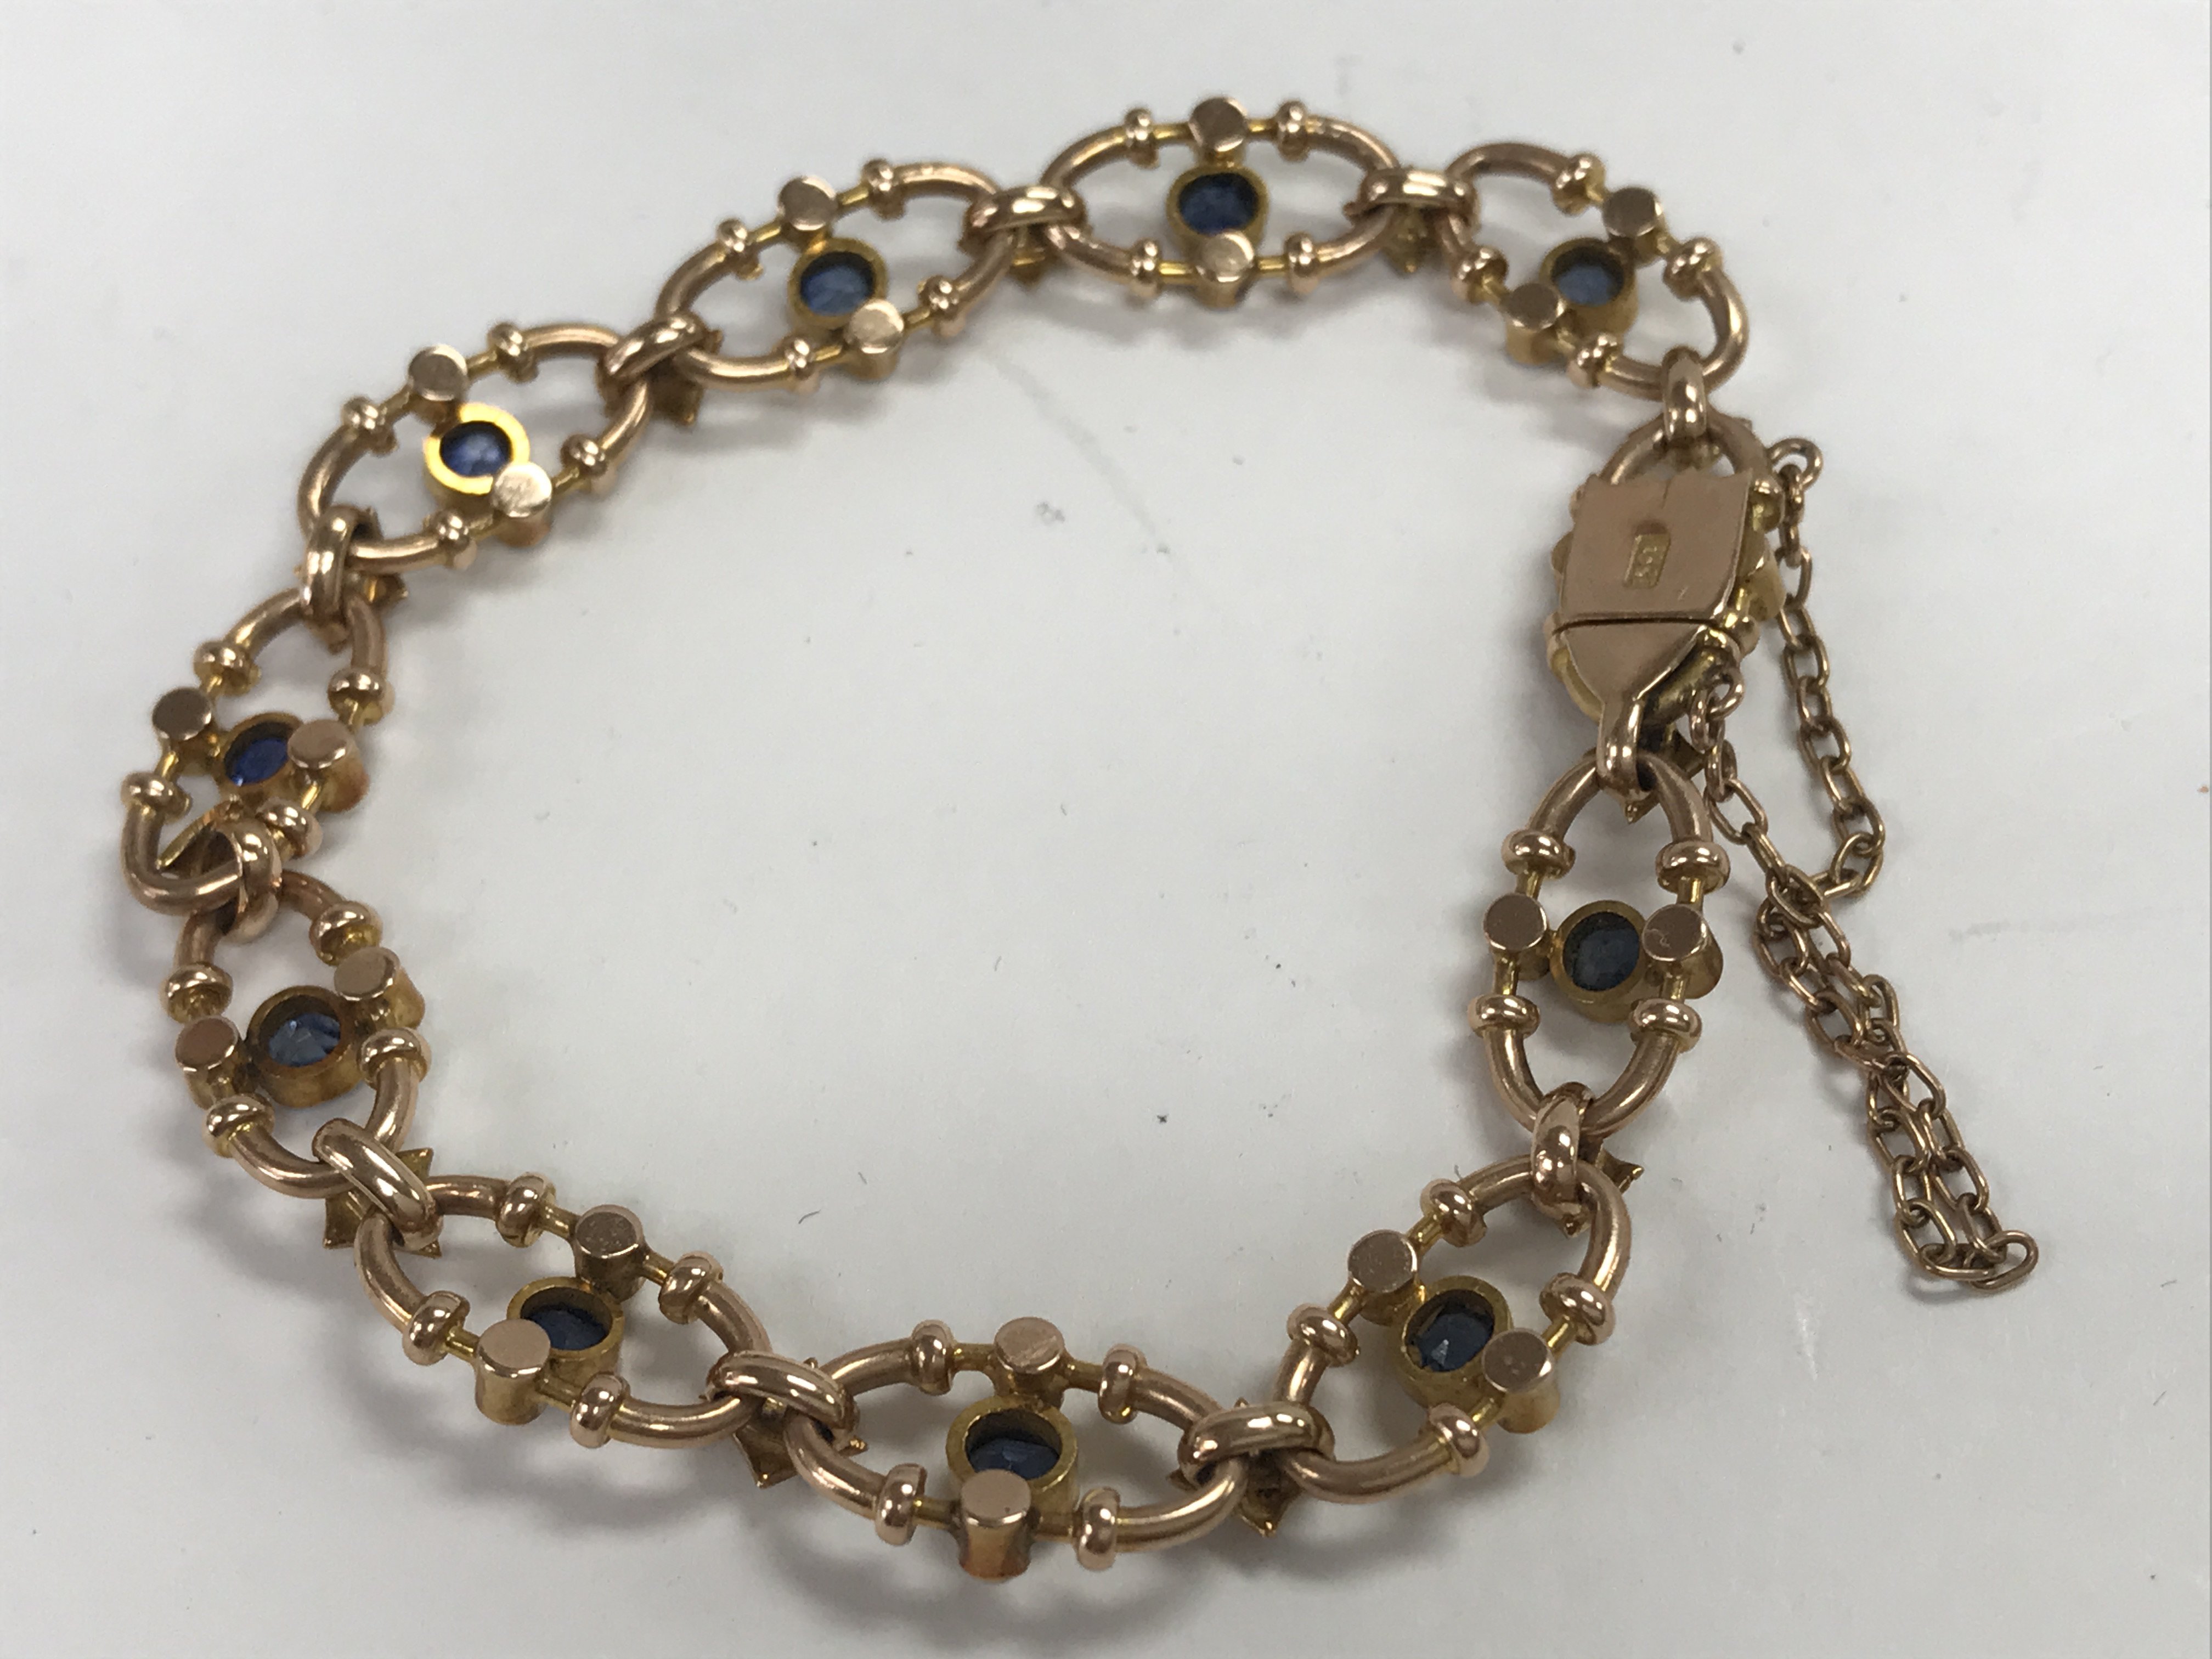 A Edwardian 15 ct gold bracelet inset with seed pe - Image 2 of 4